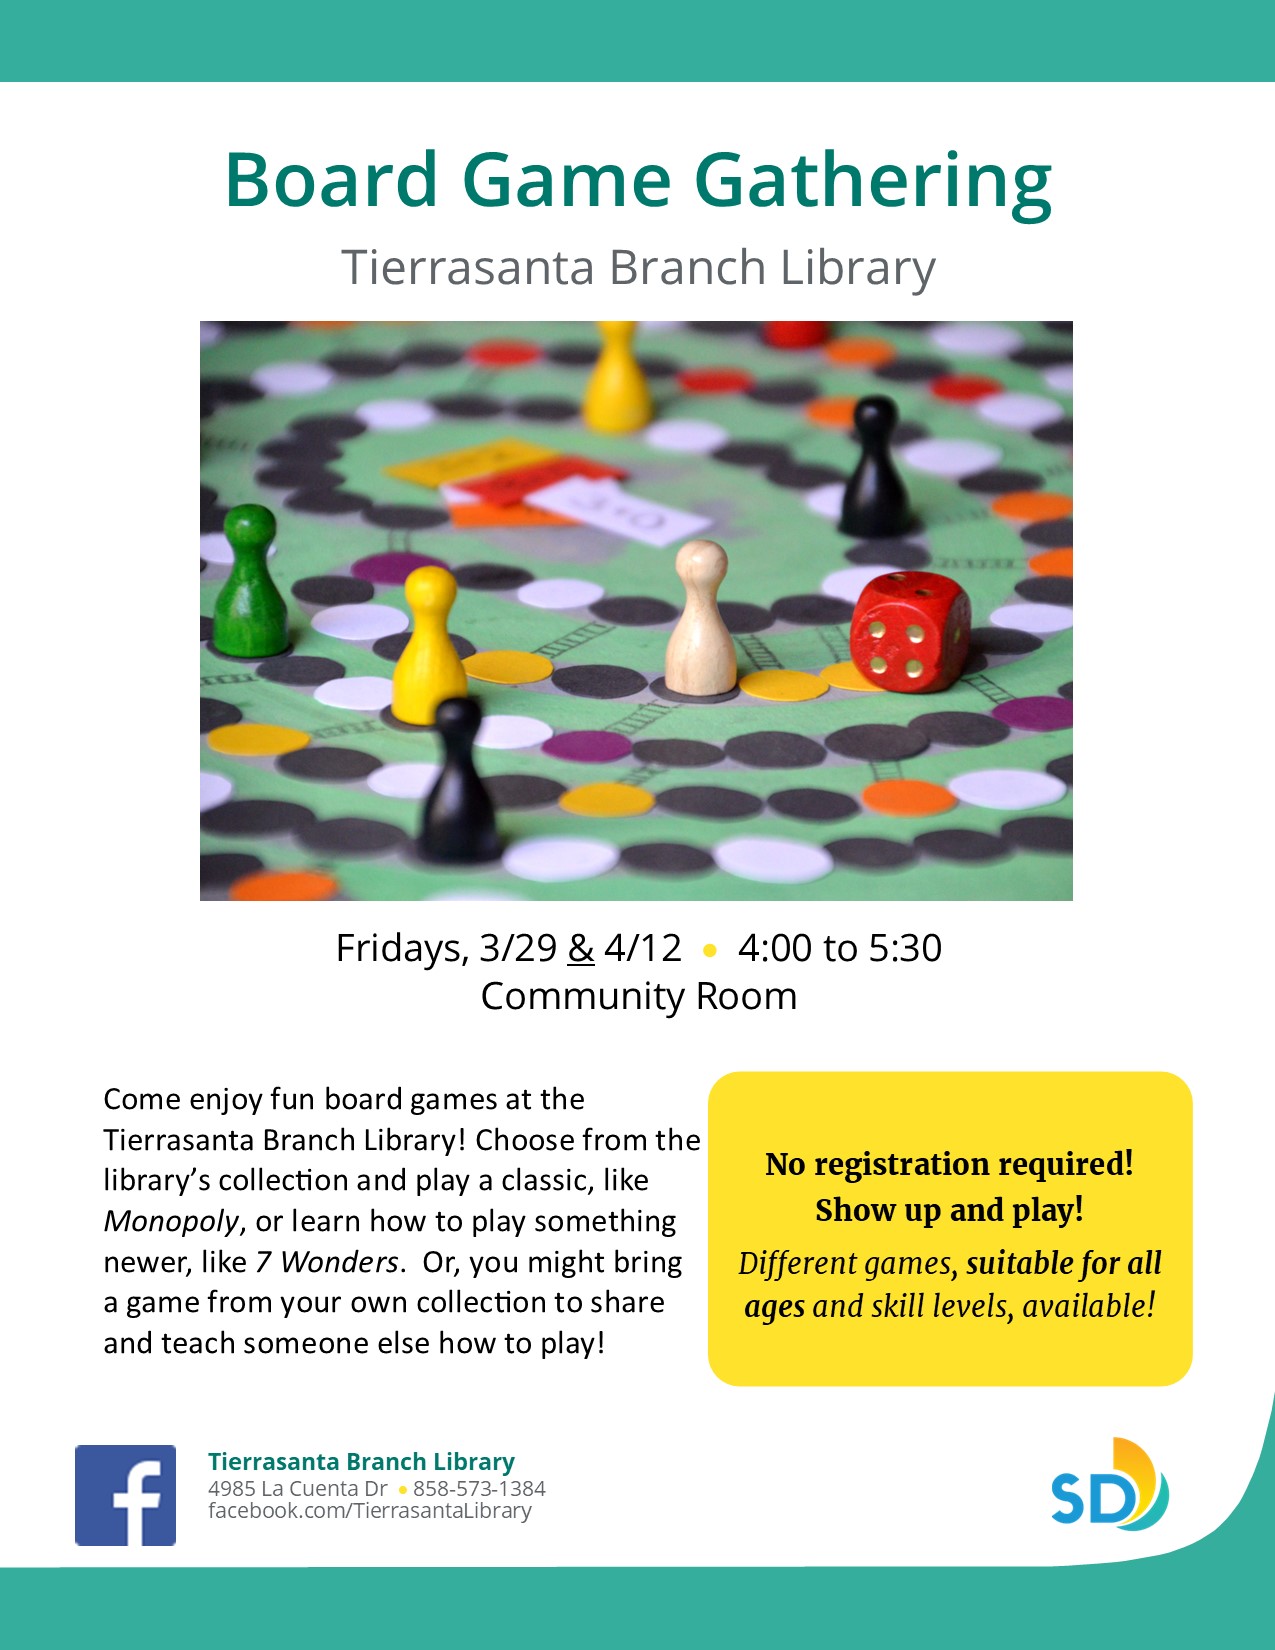 Board Game Gathering informational flyer featuring an image of game pieces on a gameboard.